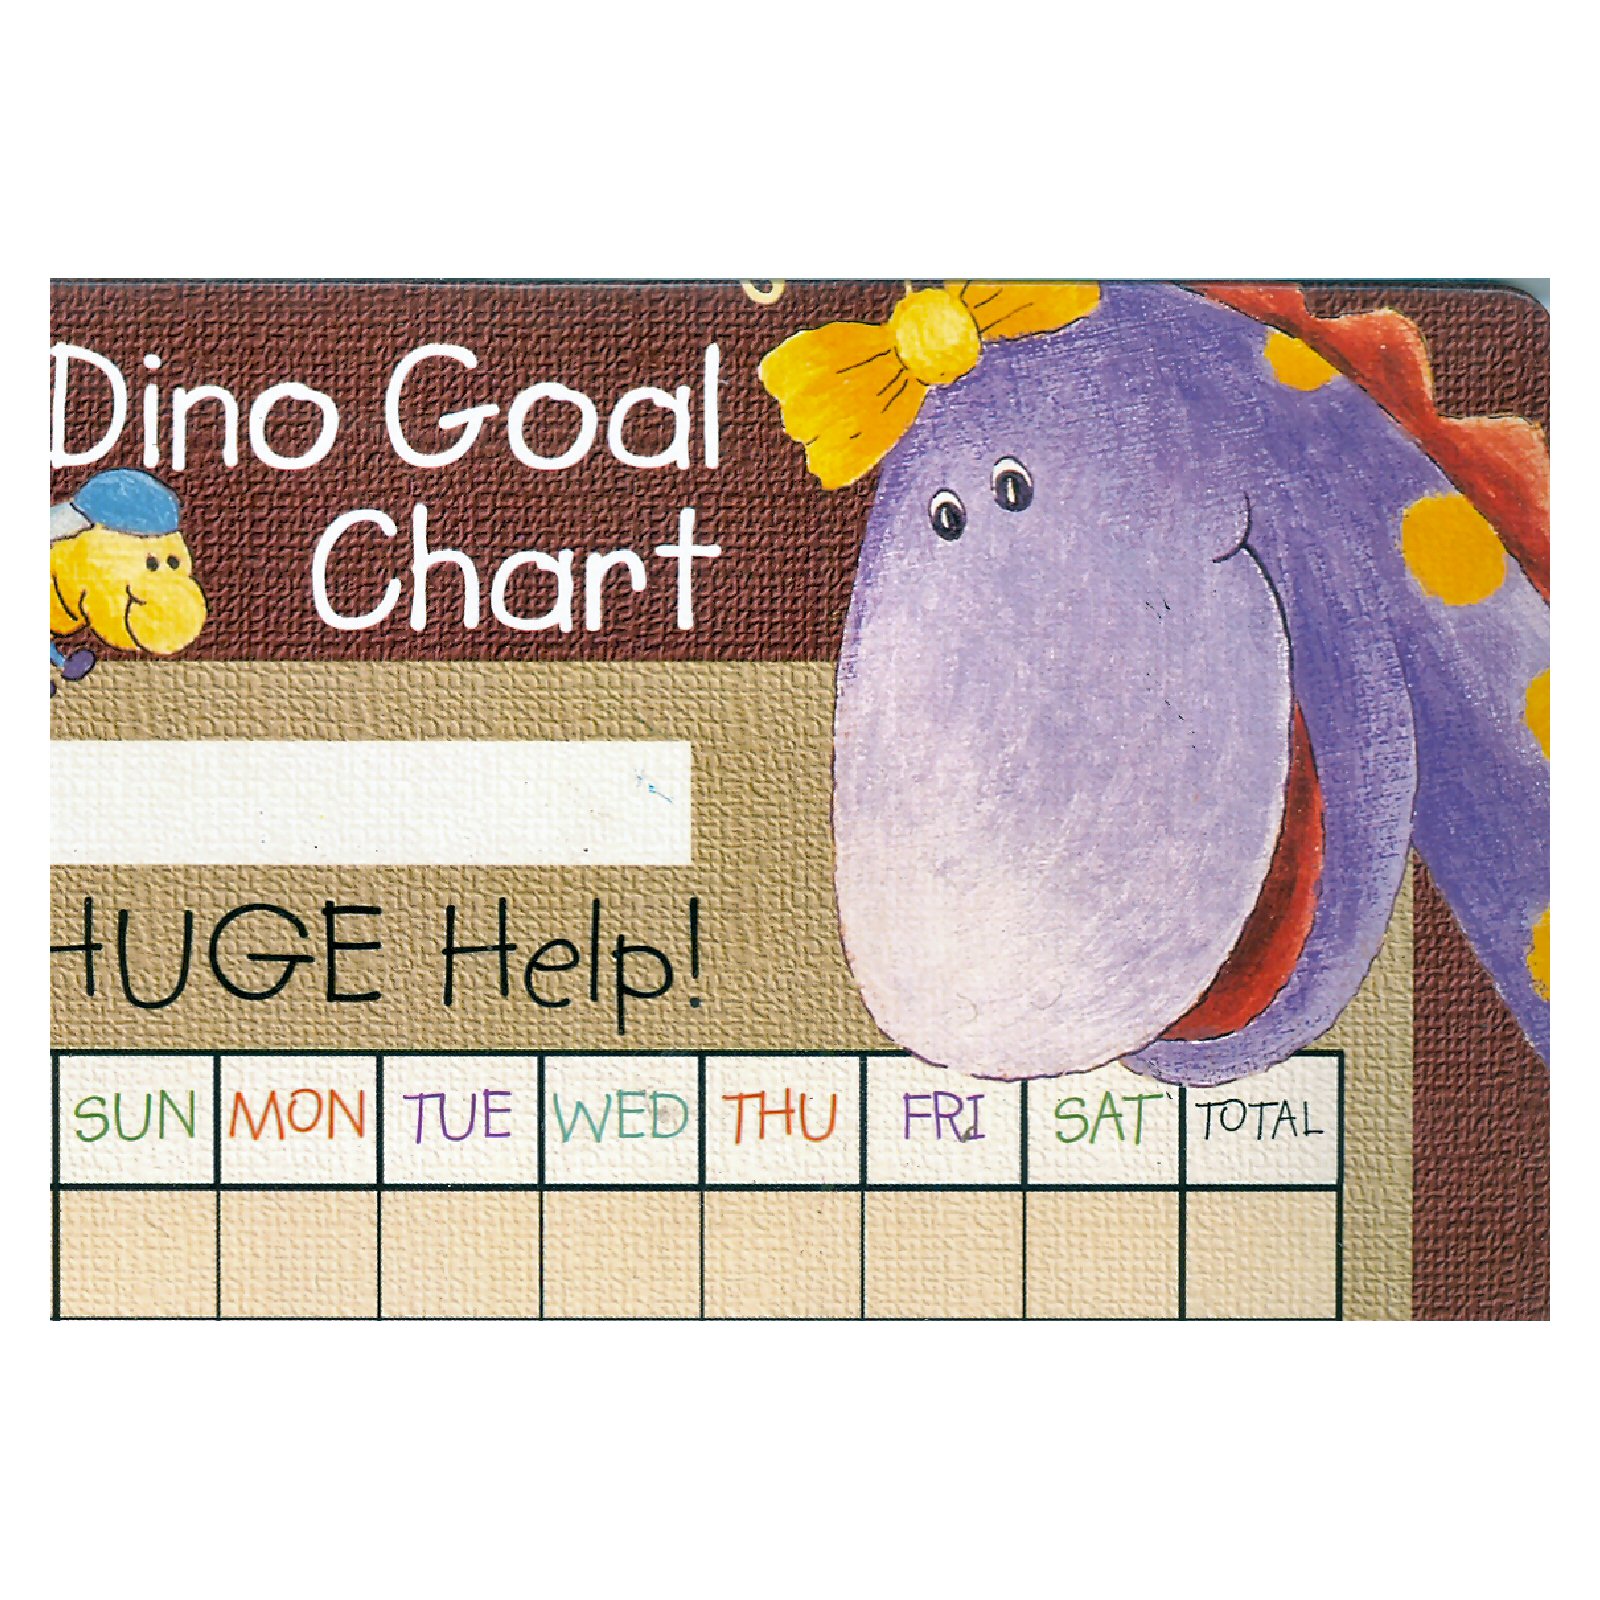 Dino Pals Goal and Chore Chart